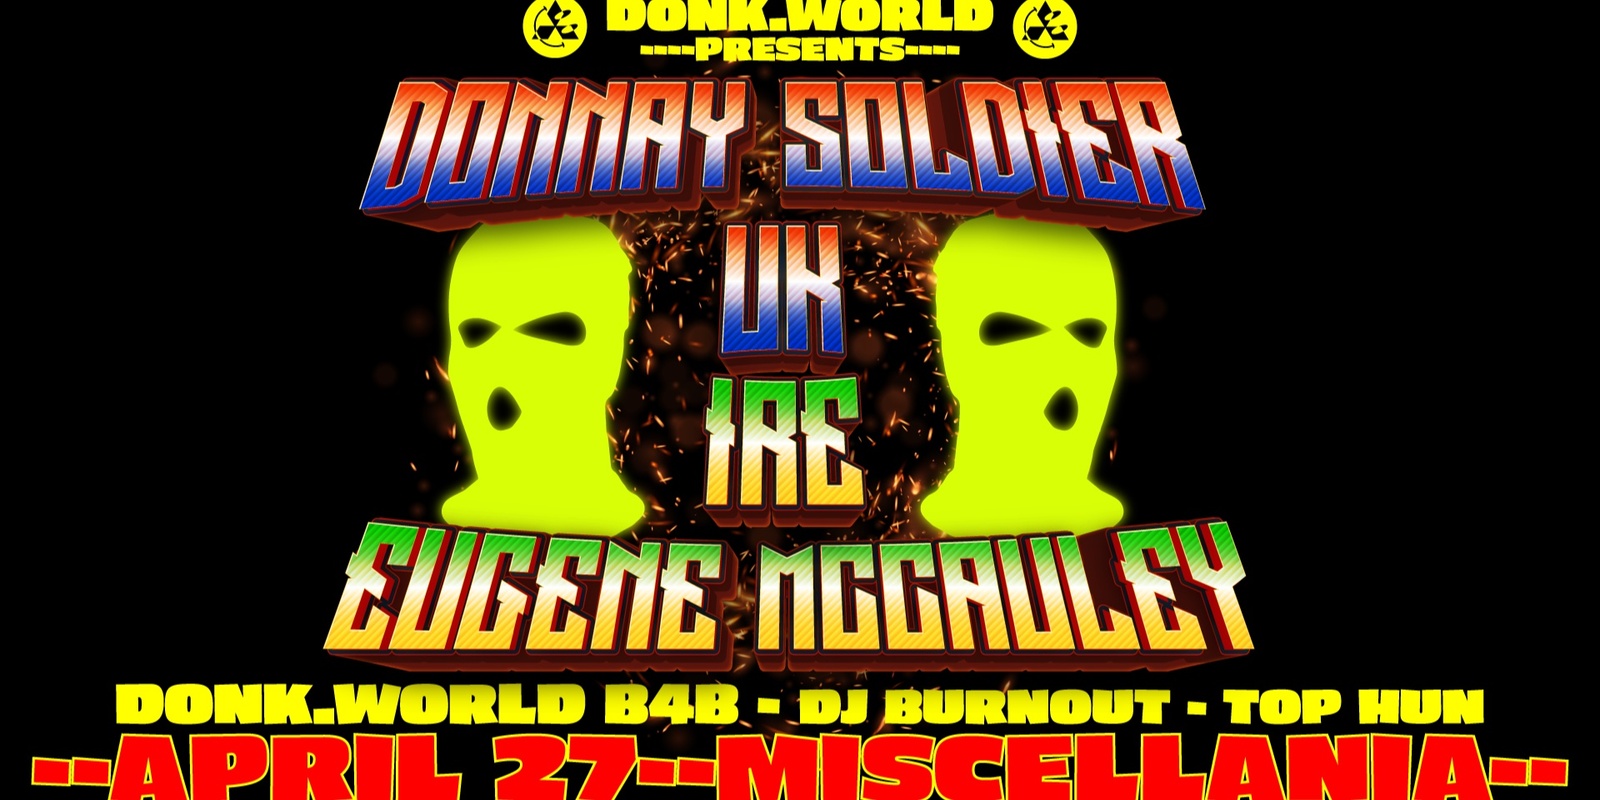 Banner image for DONK.WORLD PRESENT: DONNAY SOLDIER & EUGENE MCCAULEY